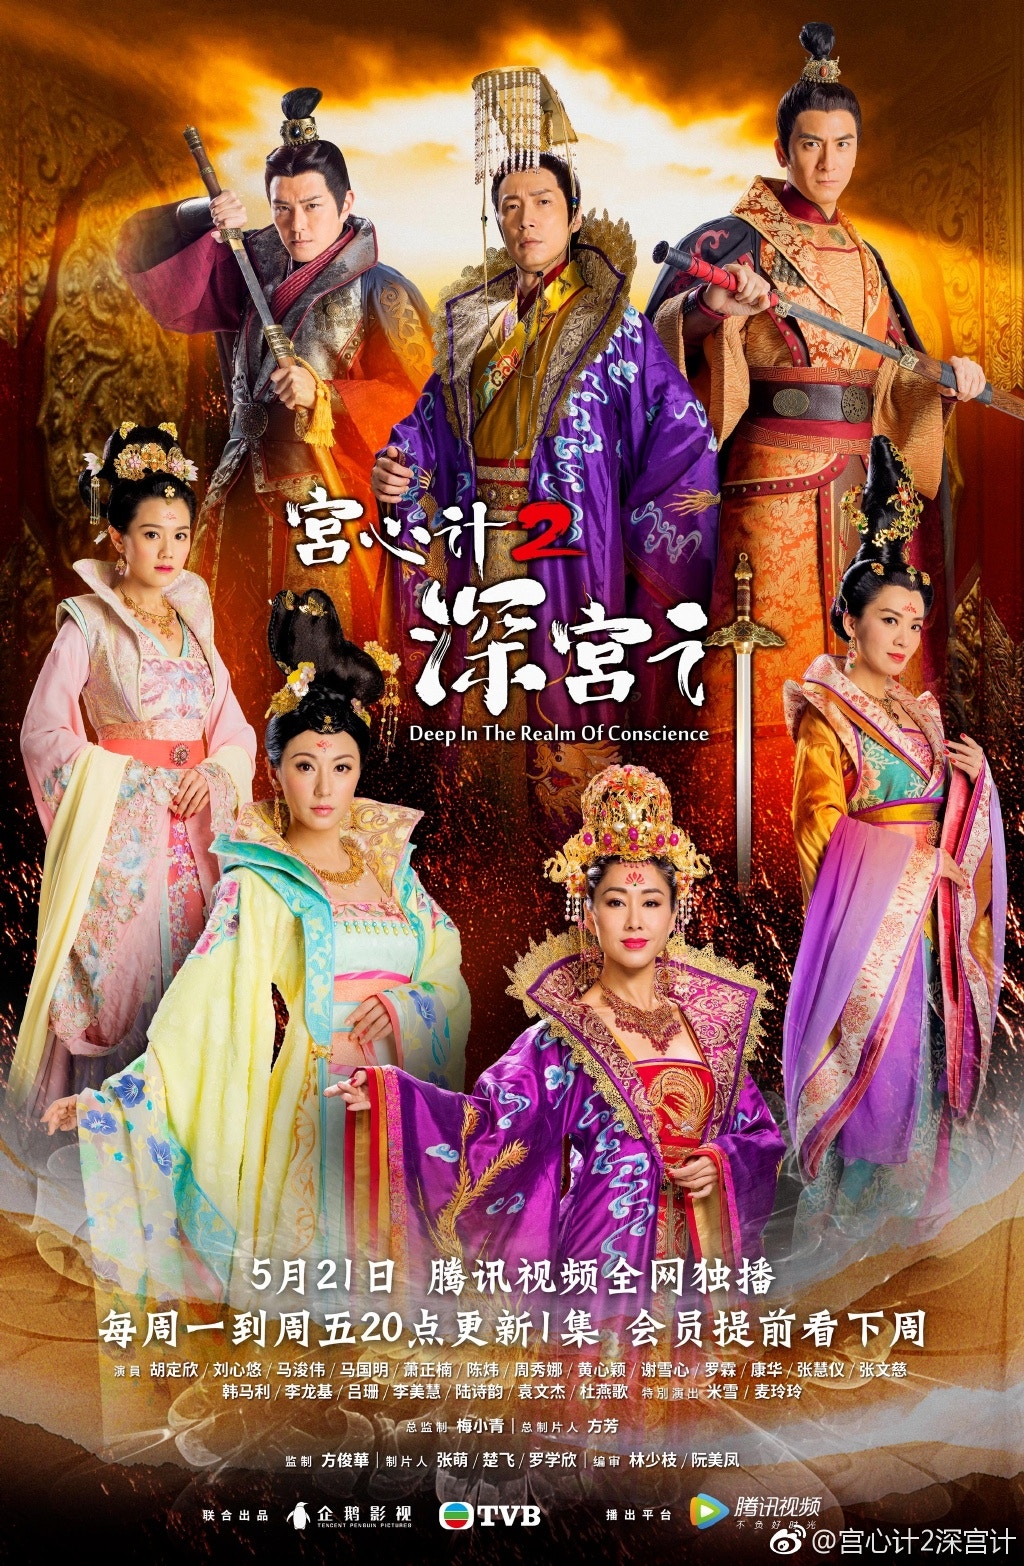 HK TV Drama, watch tvb drama online, Deep In The Realm Of Conscience